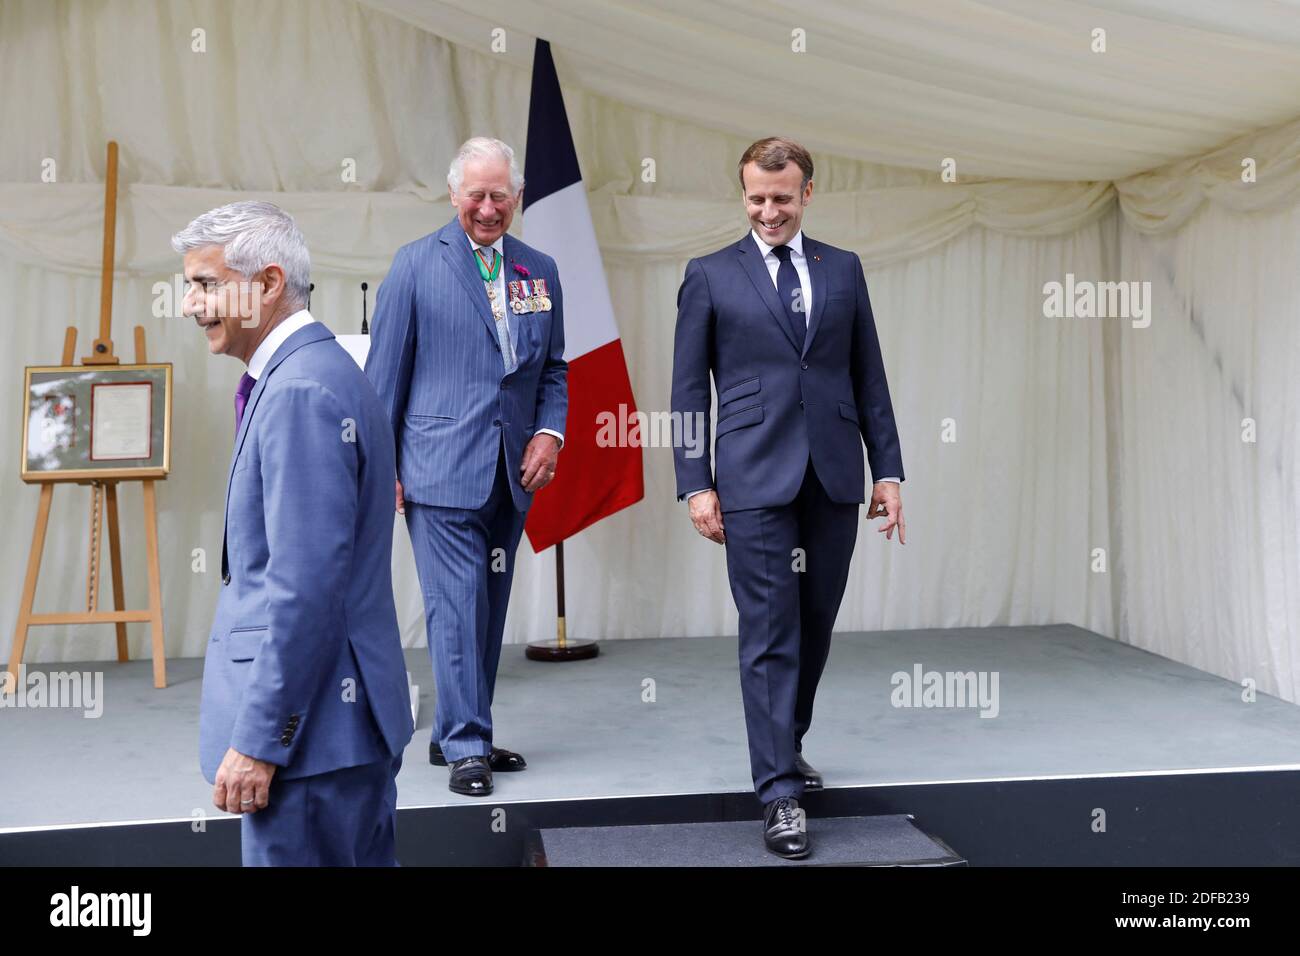 Britain's Prince Charles, Prince of Wales (C) and French President Emmanuel Macron (R) leave after a ceremony to lay wreaths at the statue of former French president Charles de Gaulle at Carlton Gardens in central London on June 18, 2020 during a visit to mark the anniversary of former de Gaulle's appeal to French people to resist the Nazi occupation. - Macron visited London on June 18 to commemorate the 80th anniversary of former French president Charles de Gaulle's appeal to French people to resist the Nazi occupation during World War II. Photo by Tolga AKMEN/Pool/ABACAPRESS.COM Stock Photo